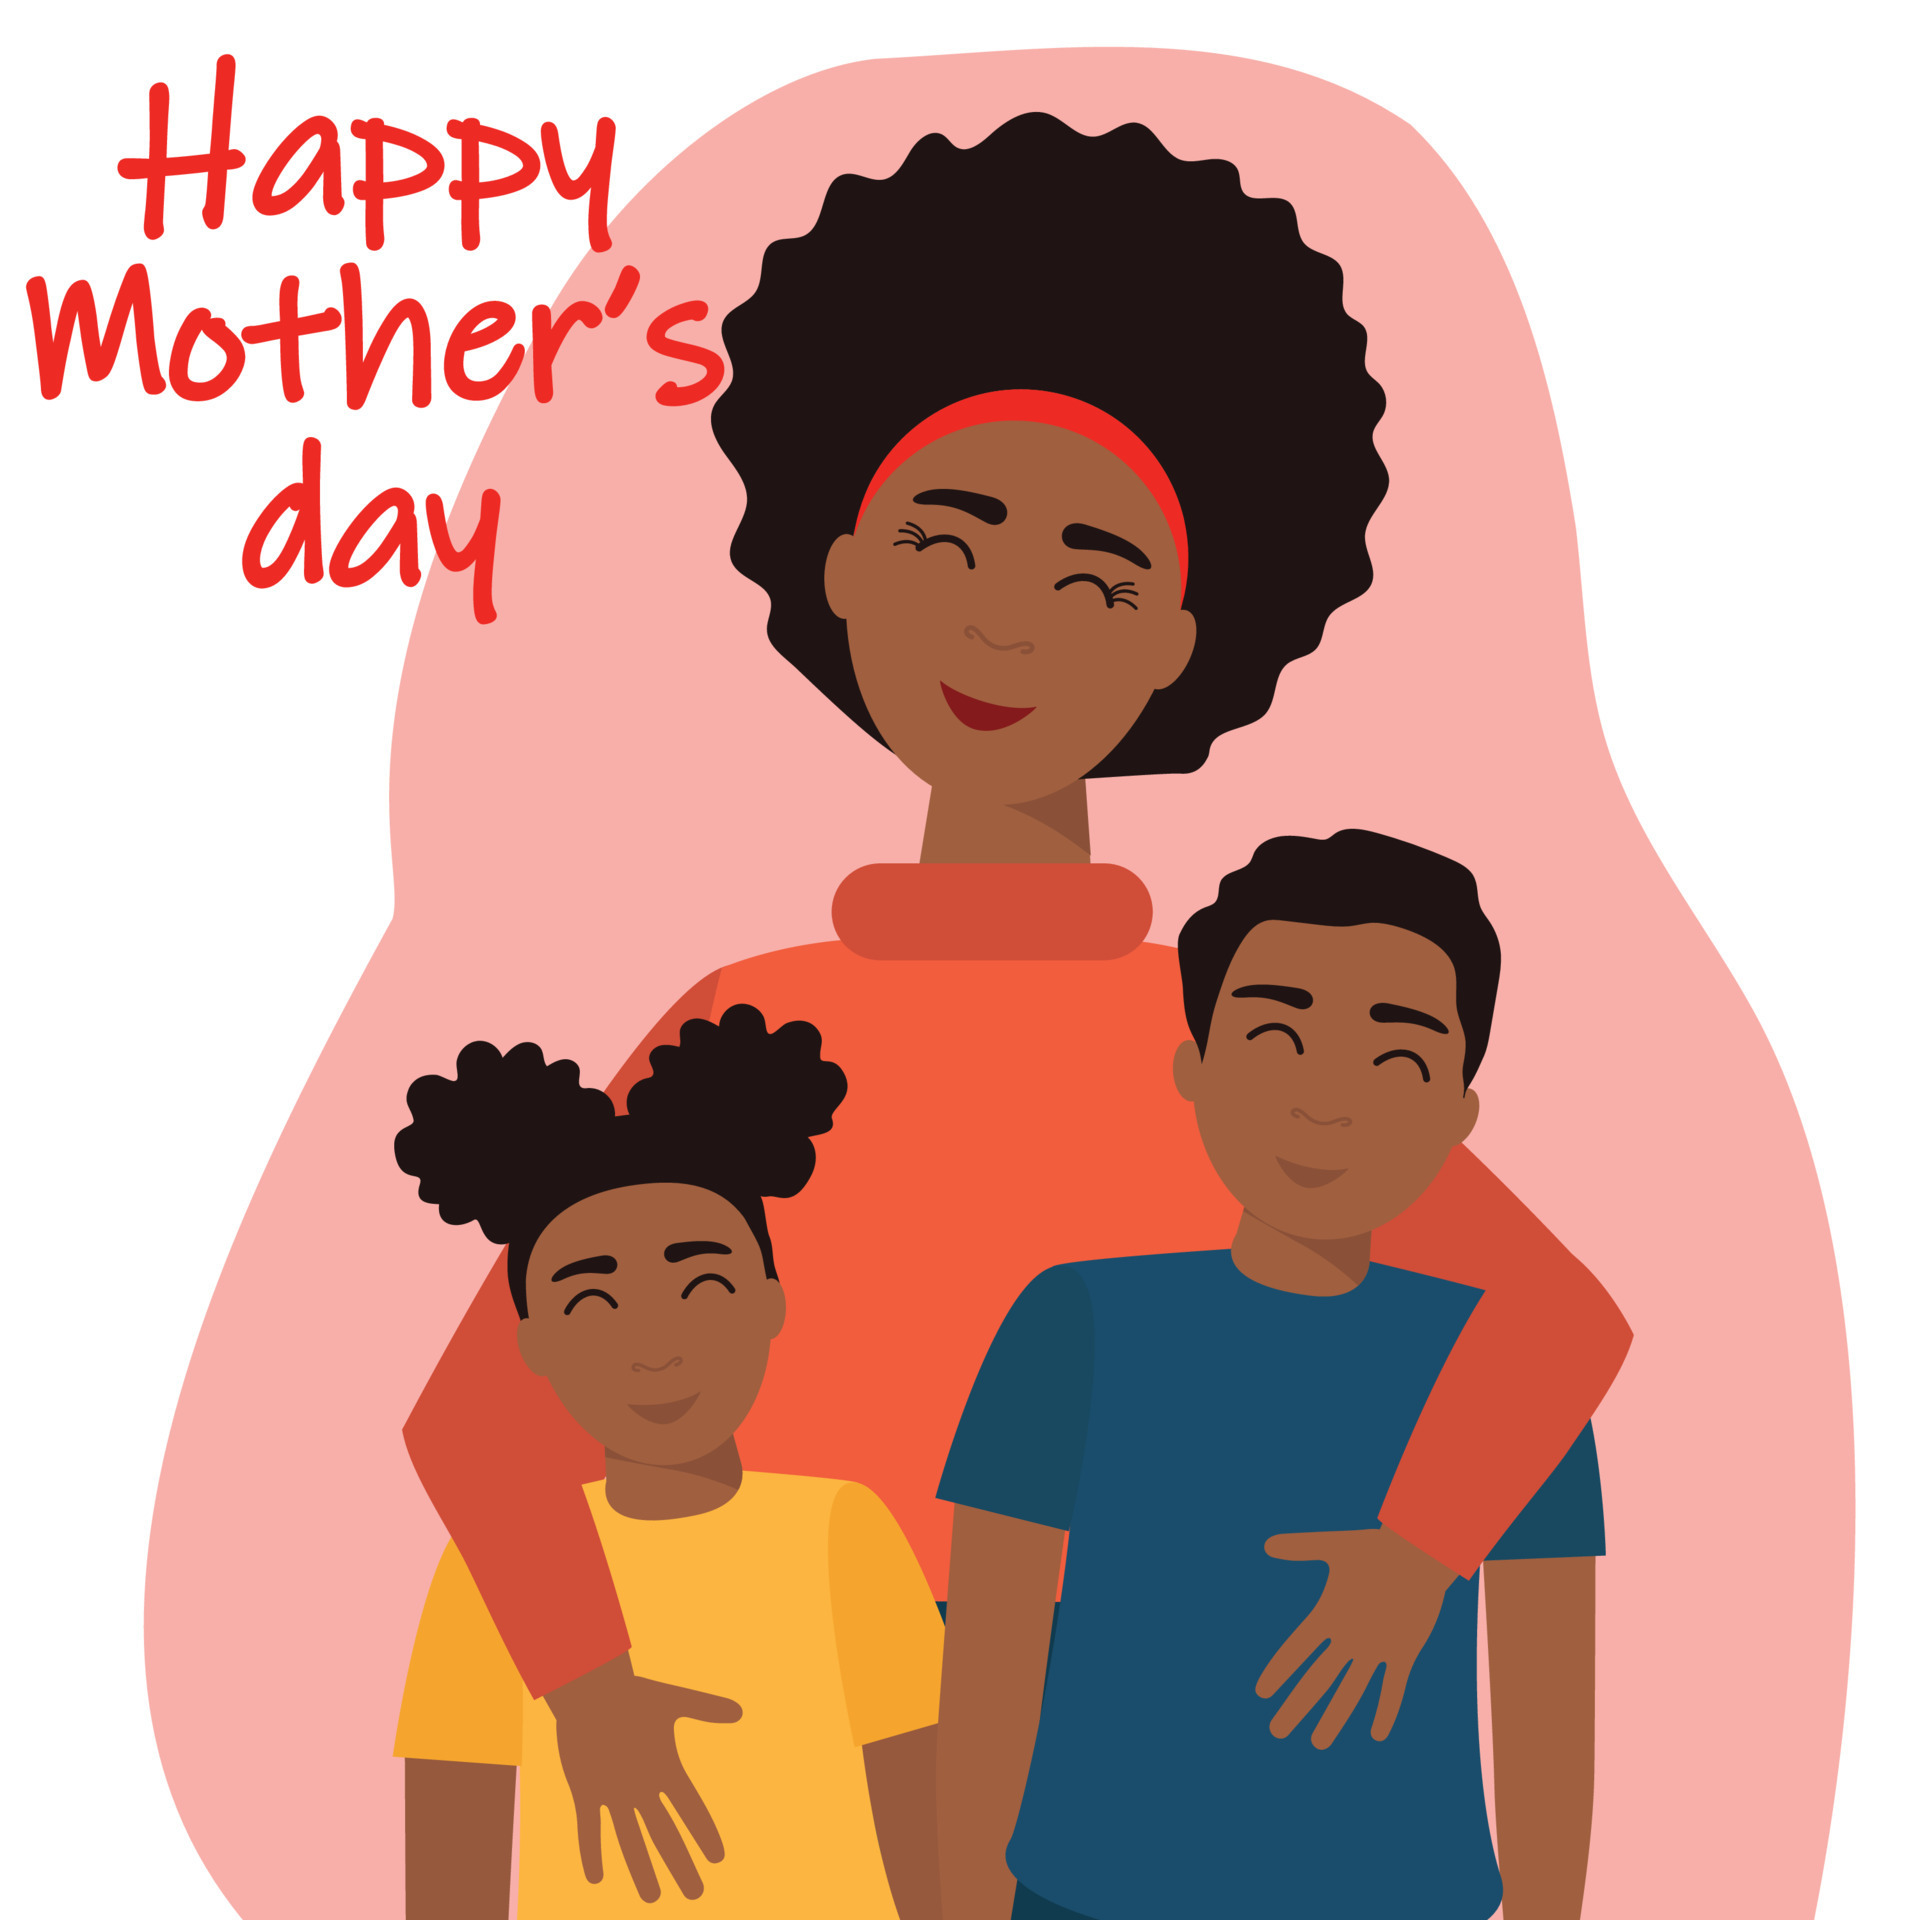 African American mother with children. Woman with boy and girl, son and